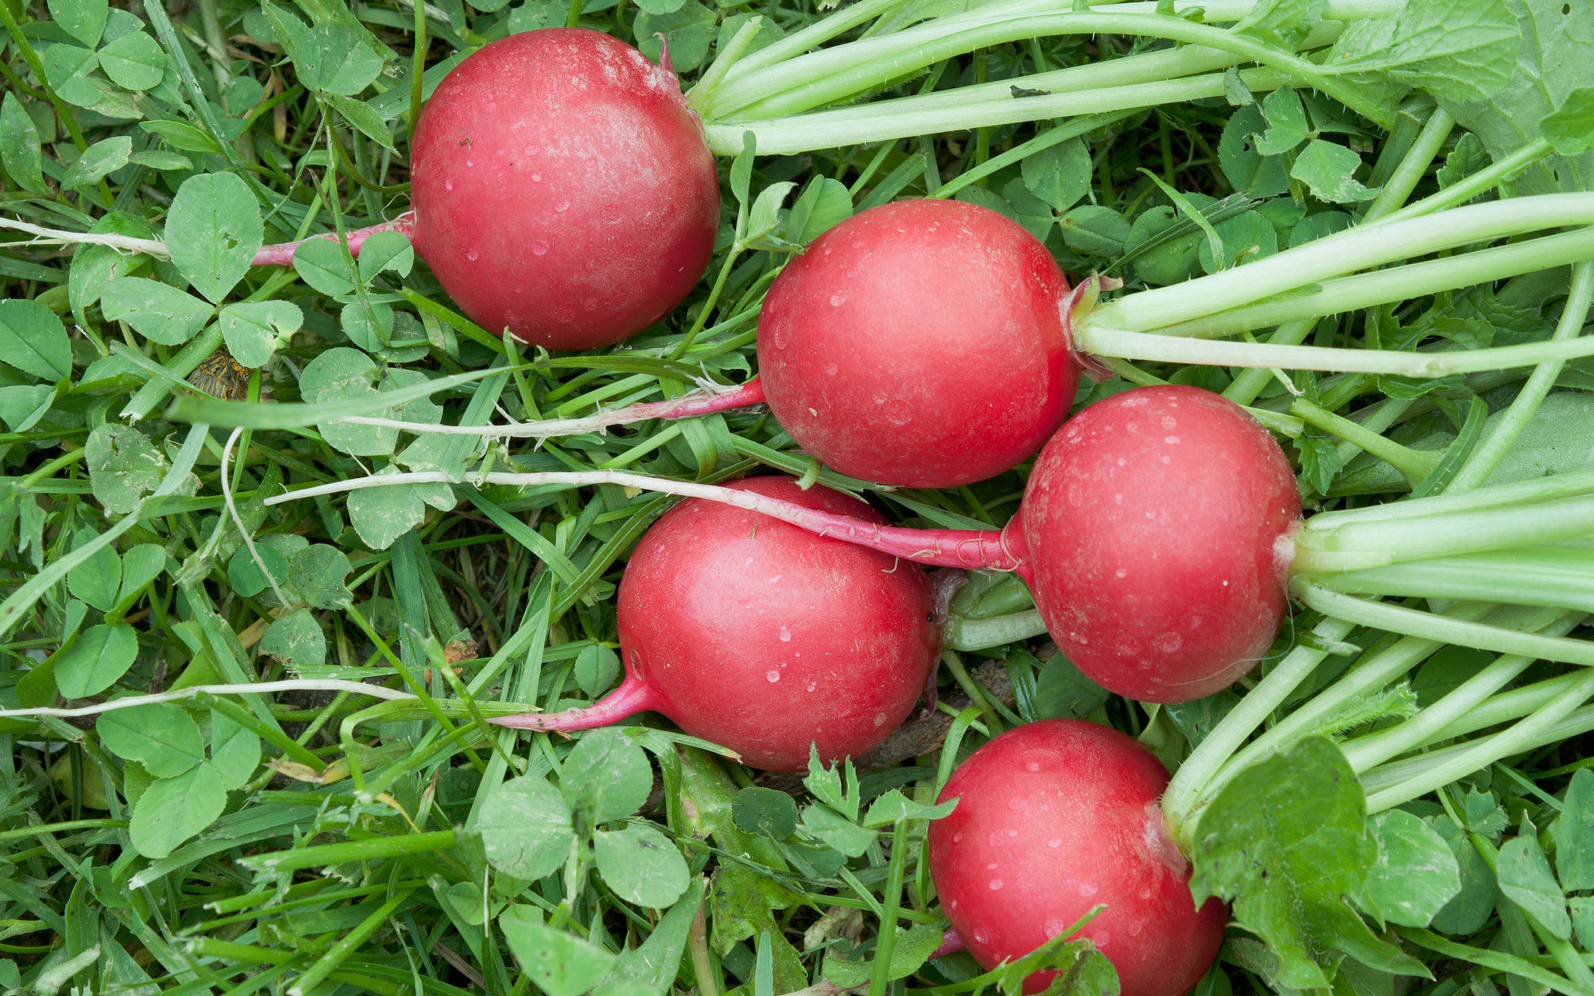 hydroponically grown radishes sitting on grass